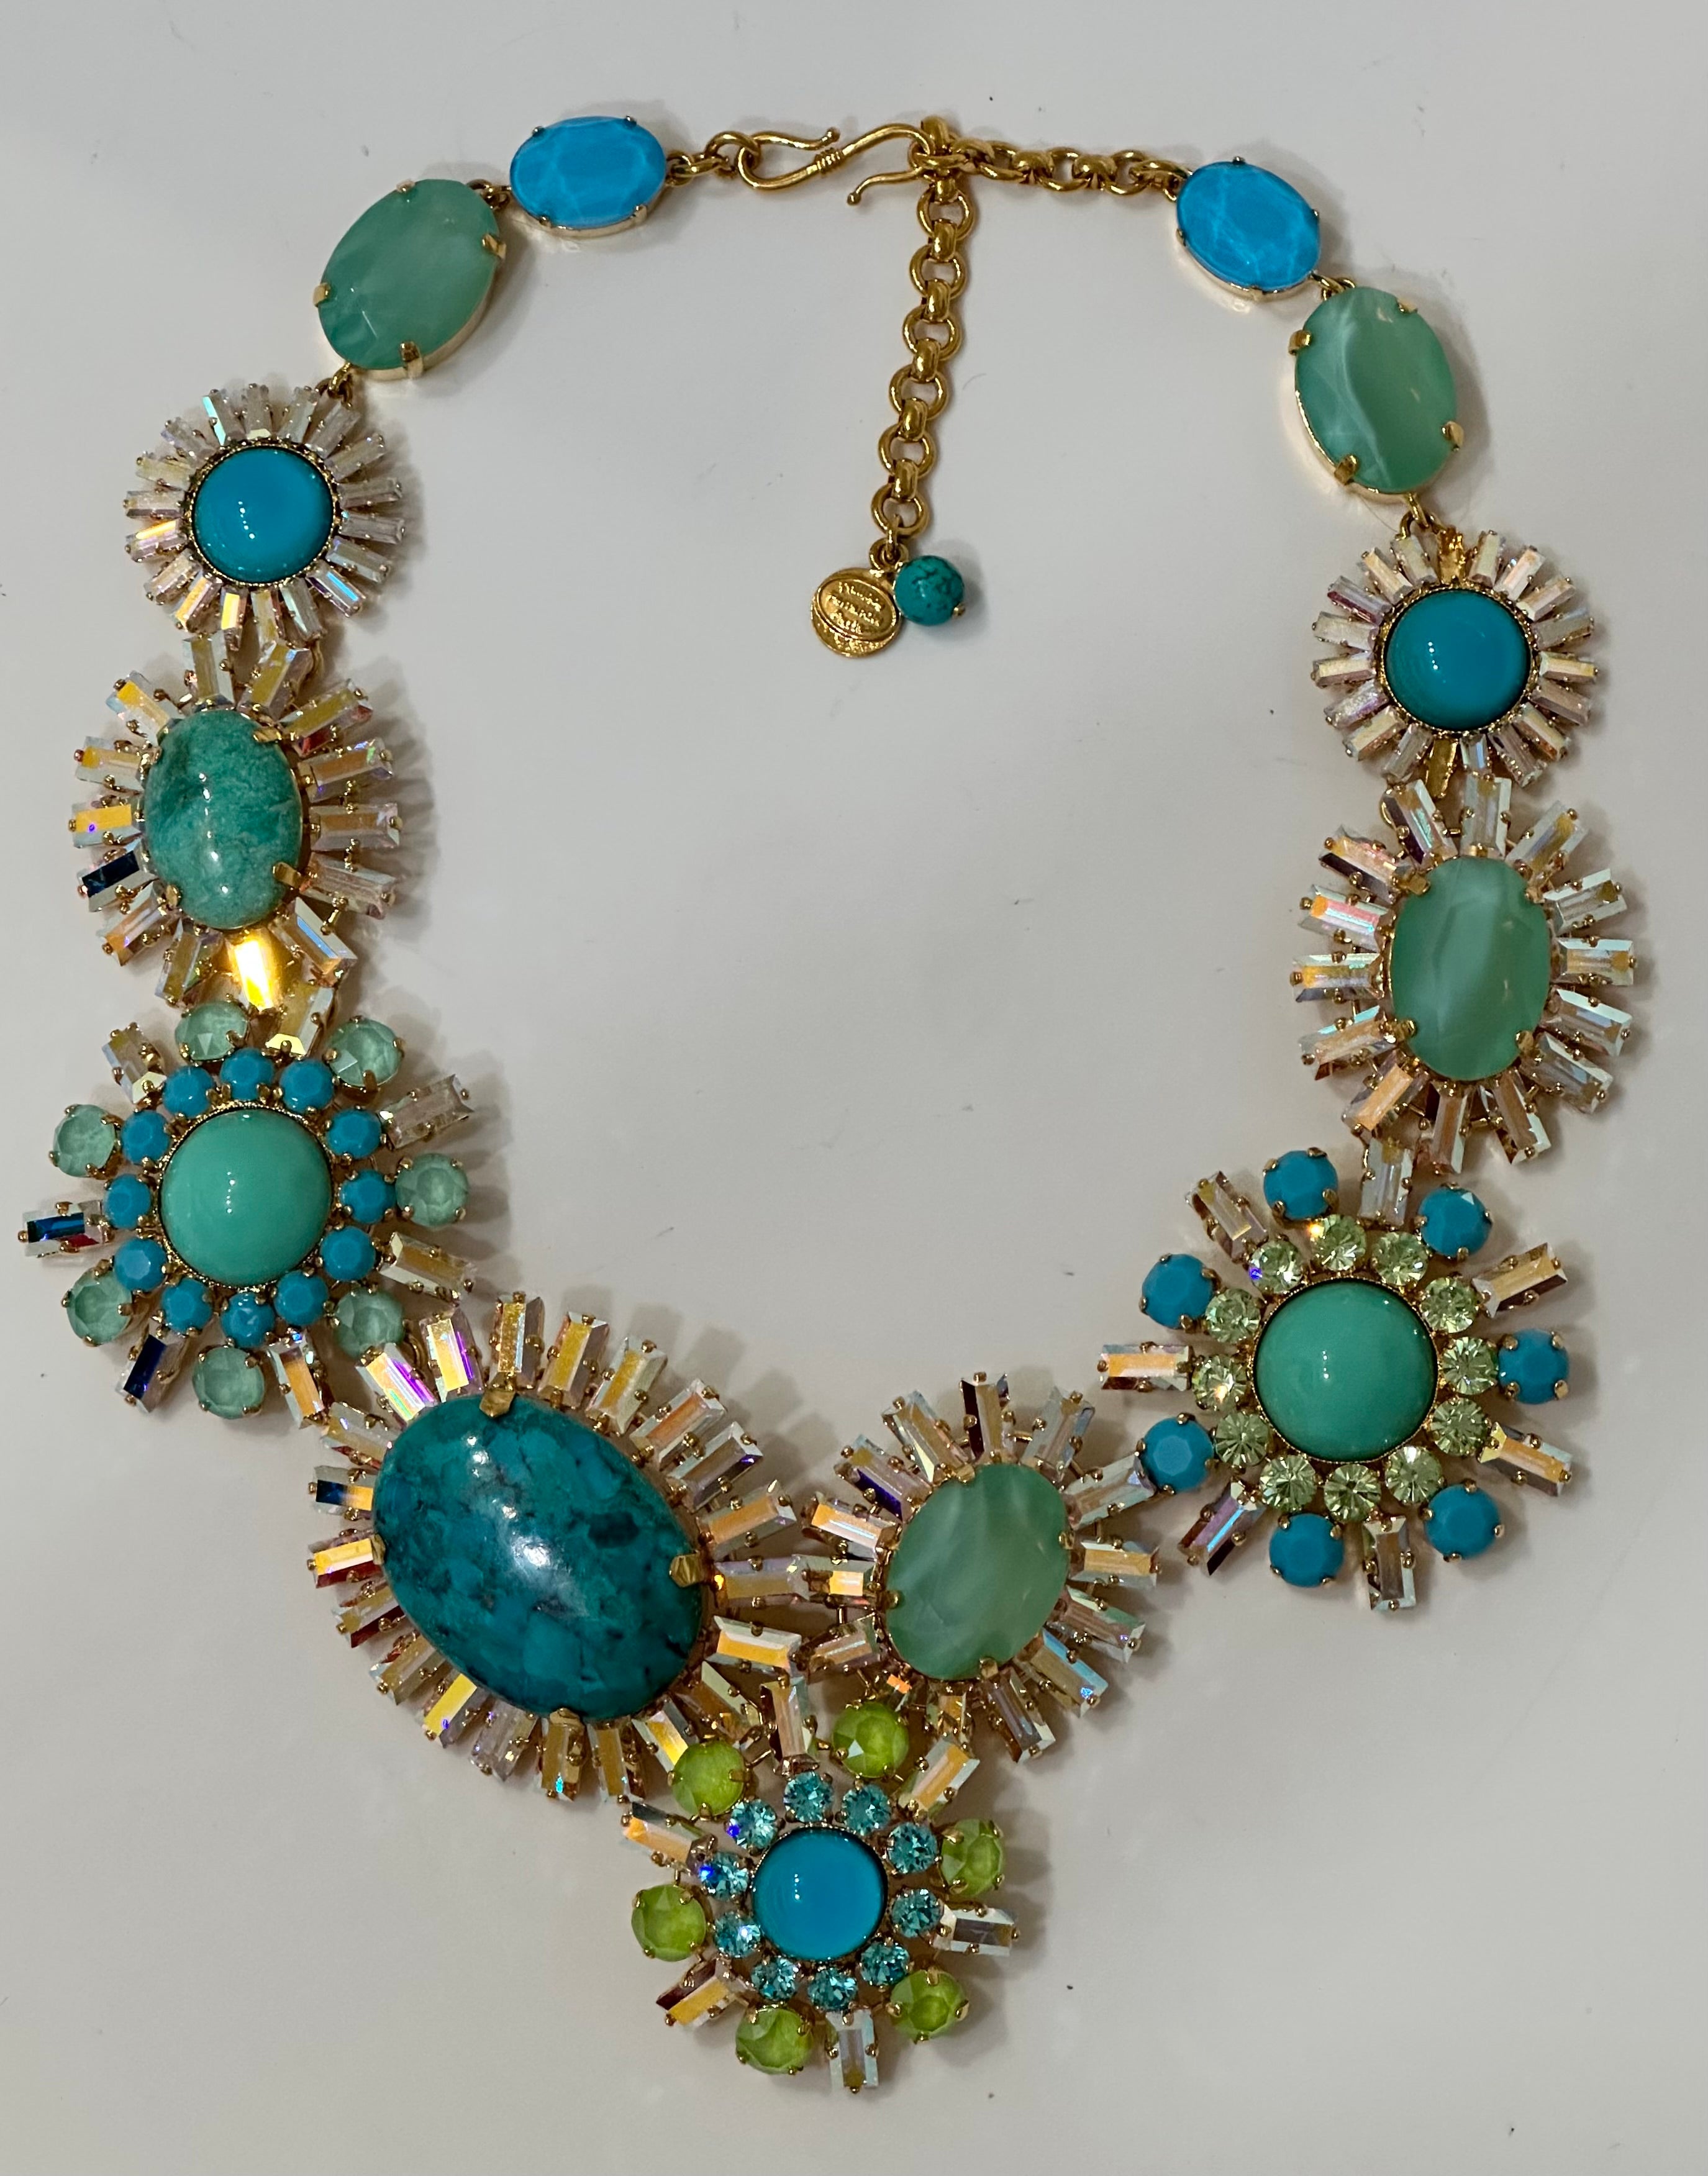 Exclusively made for Isabelle K Jewelry. This stunning one of a kind necklace has turquoise, green agate, pate de verre cabochons and Swarovski crystals in different shapes and colors . This is a timeless piece.
Made in France
Philippe Ferrandis,